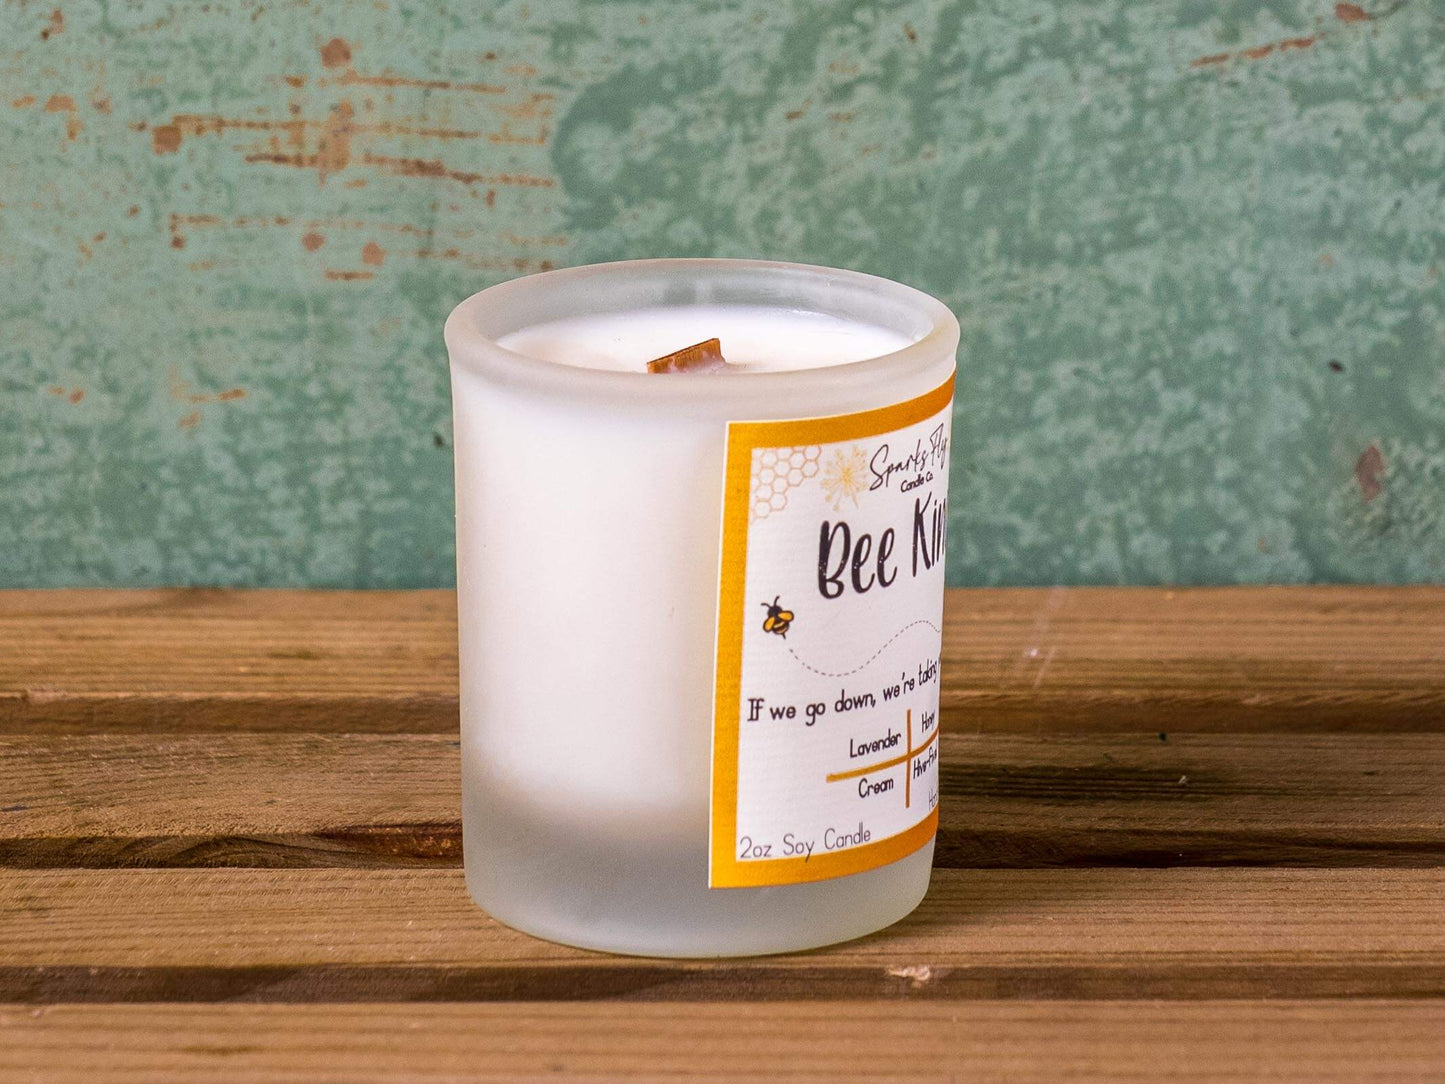 Bee Kind sassy candle; a playful reminder of the bees' importance with a cheeky message. satire